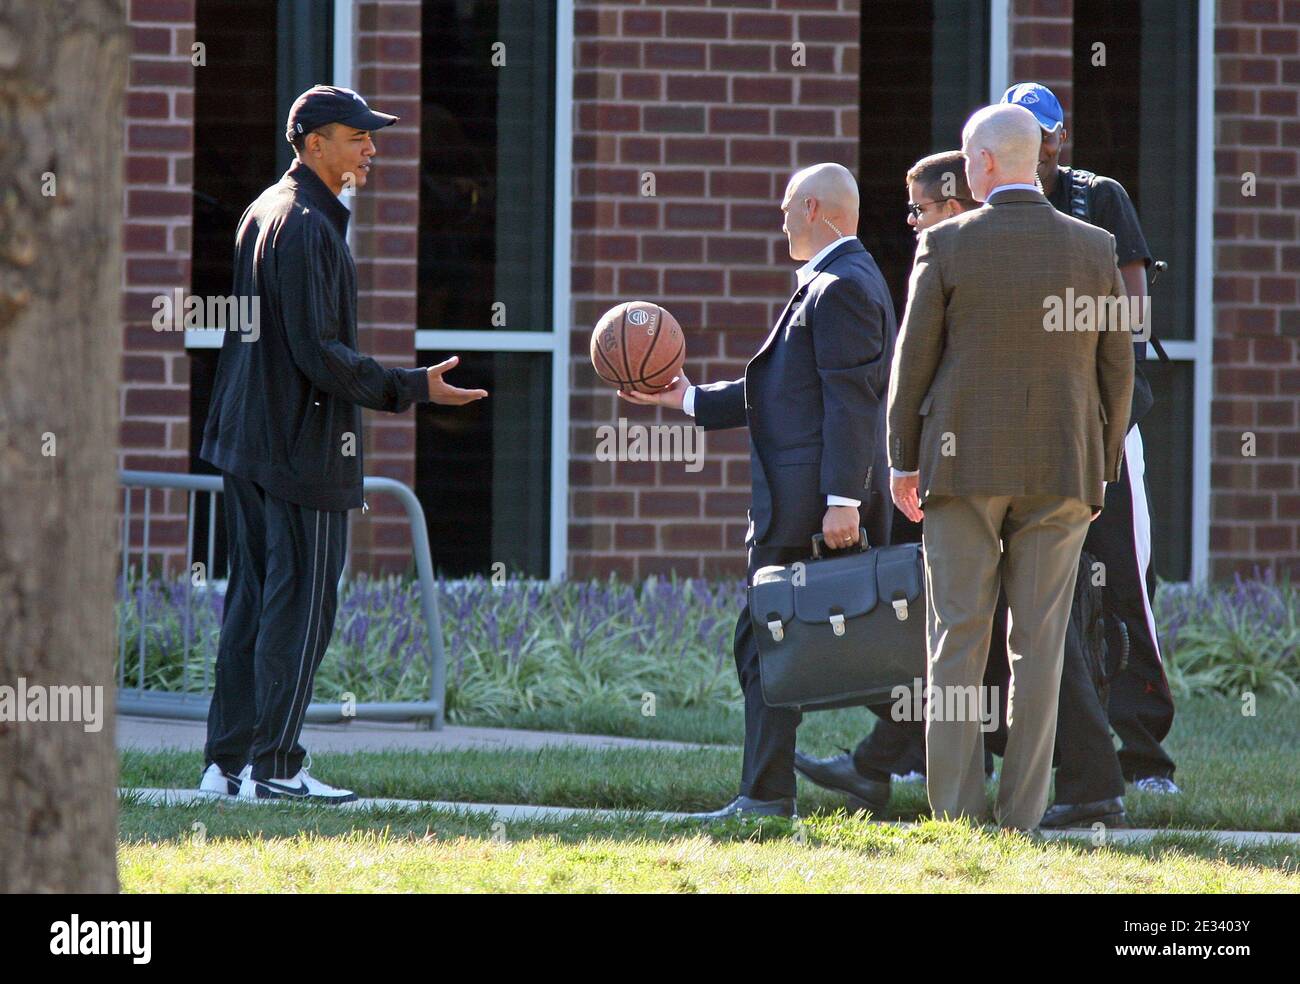 President Barack Obama is handed a basketball by a military aide as he arrives at Fort Leslie J. McNair's athletic facility for a morning game of basketball in Washington, DC, USA on September 18, 2010. Also shown are Reggie Love, the president's personal aide (blue cap), and other unidentified aides. Photo by Martin H. Simon/ABACAPRESS.COM (Pictured: Barack Obama, Reggie Love) Stock Photo